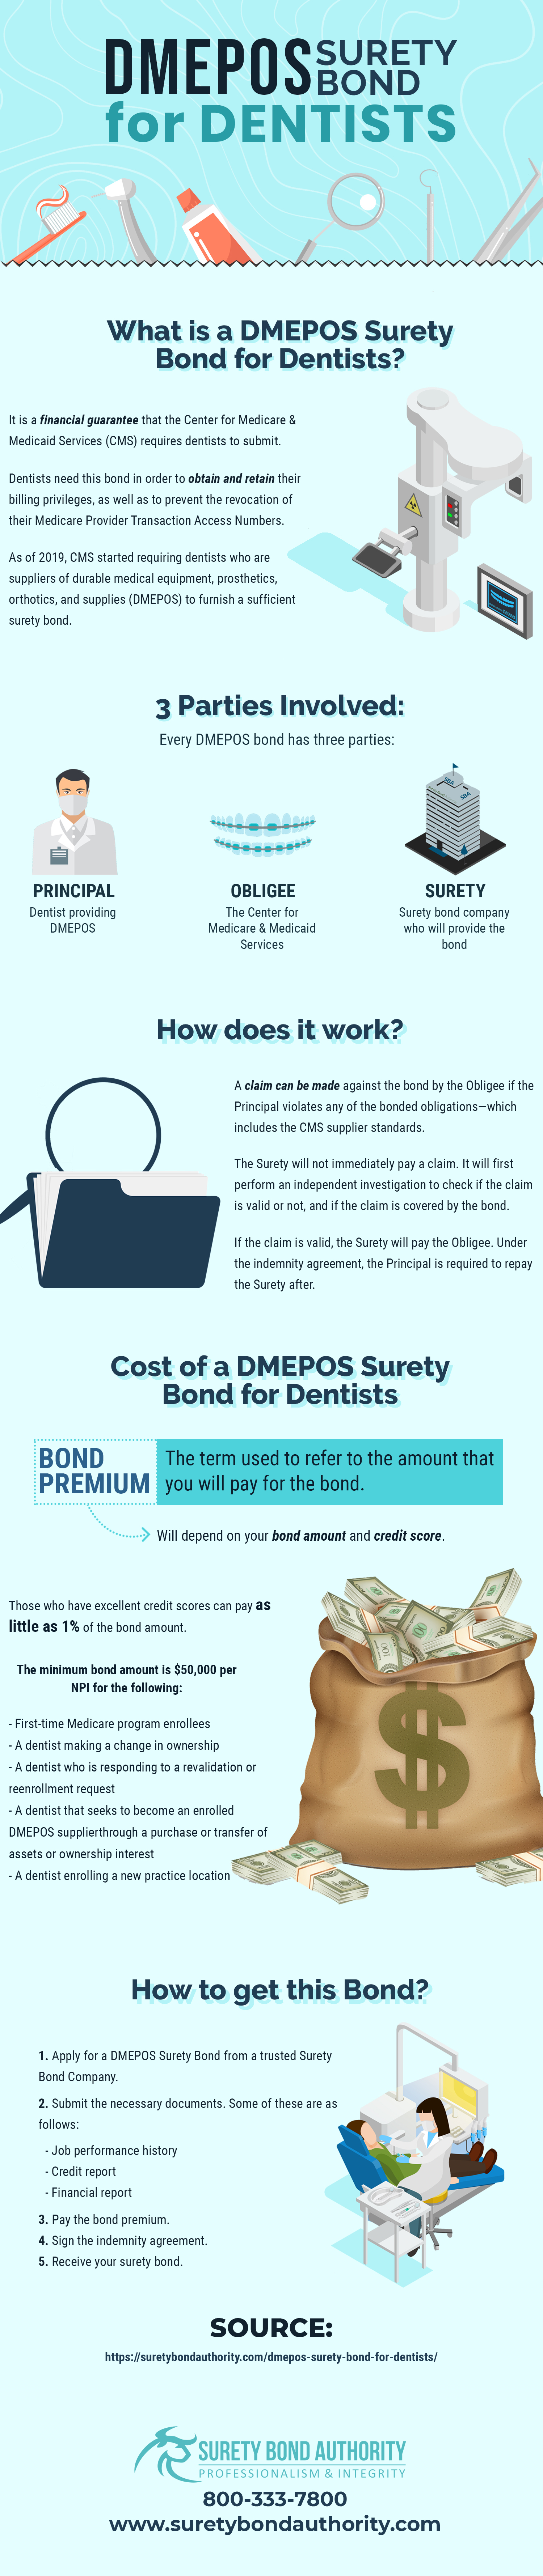 DMEPOS for Dentists Infographic